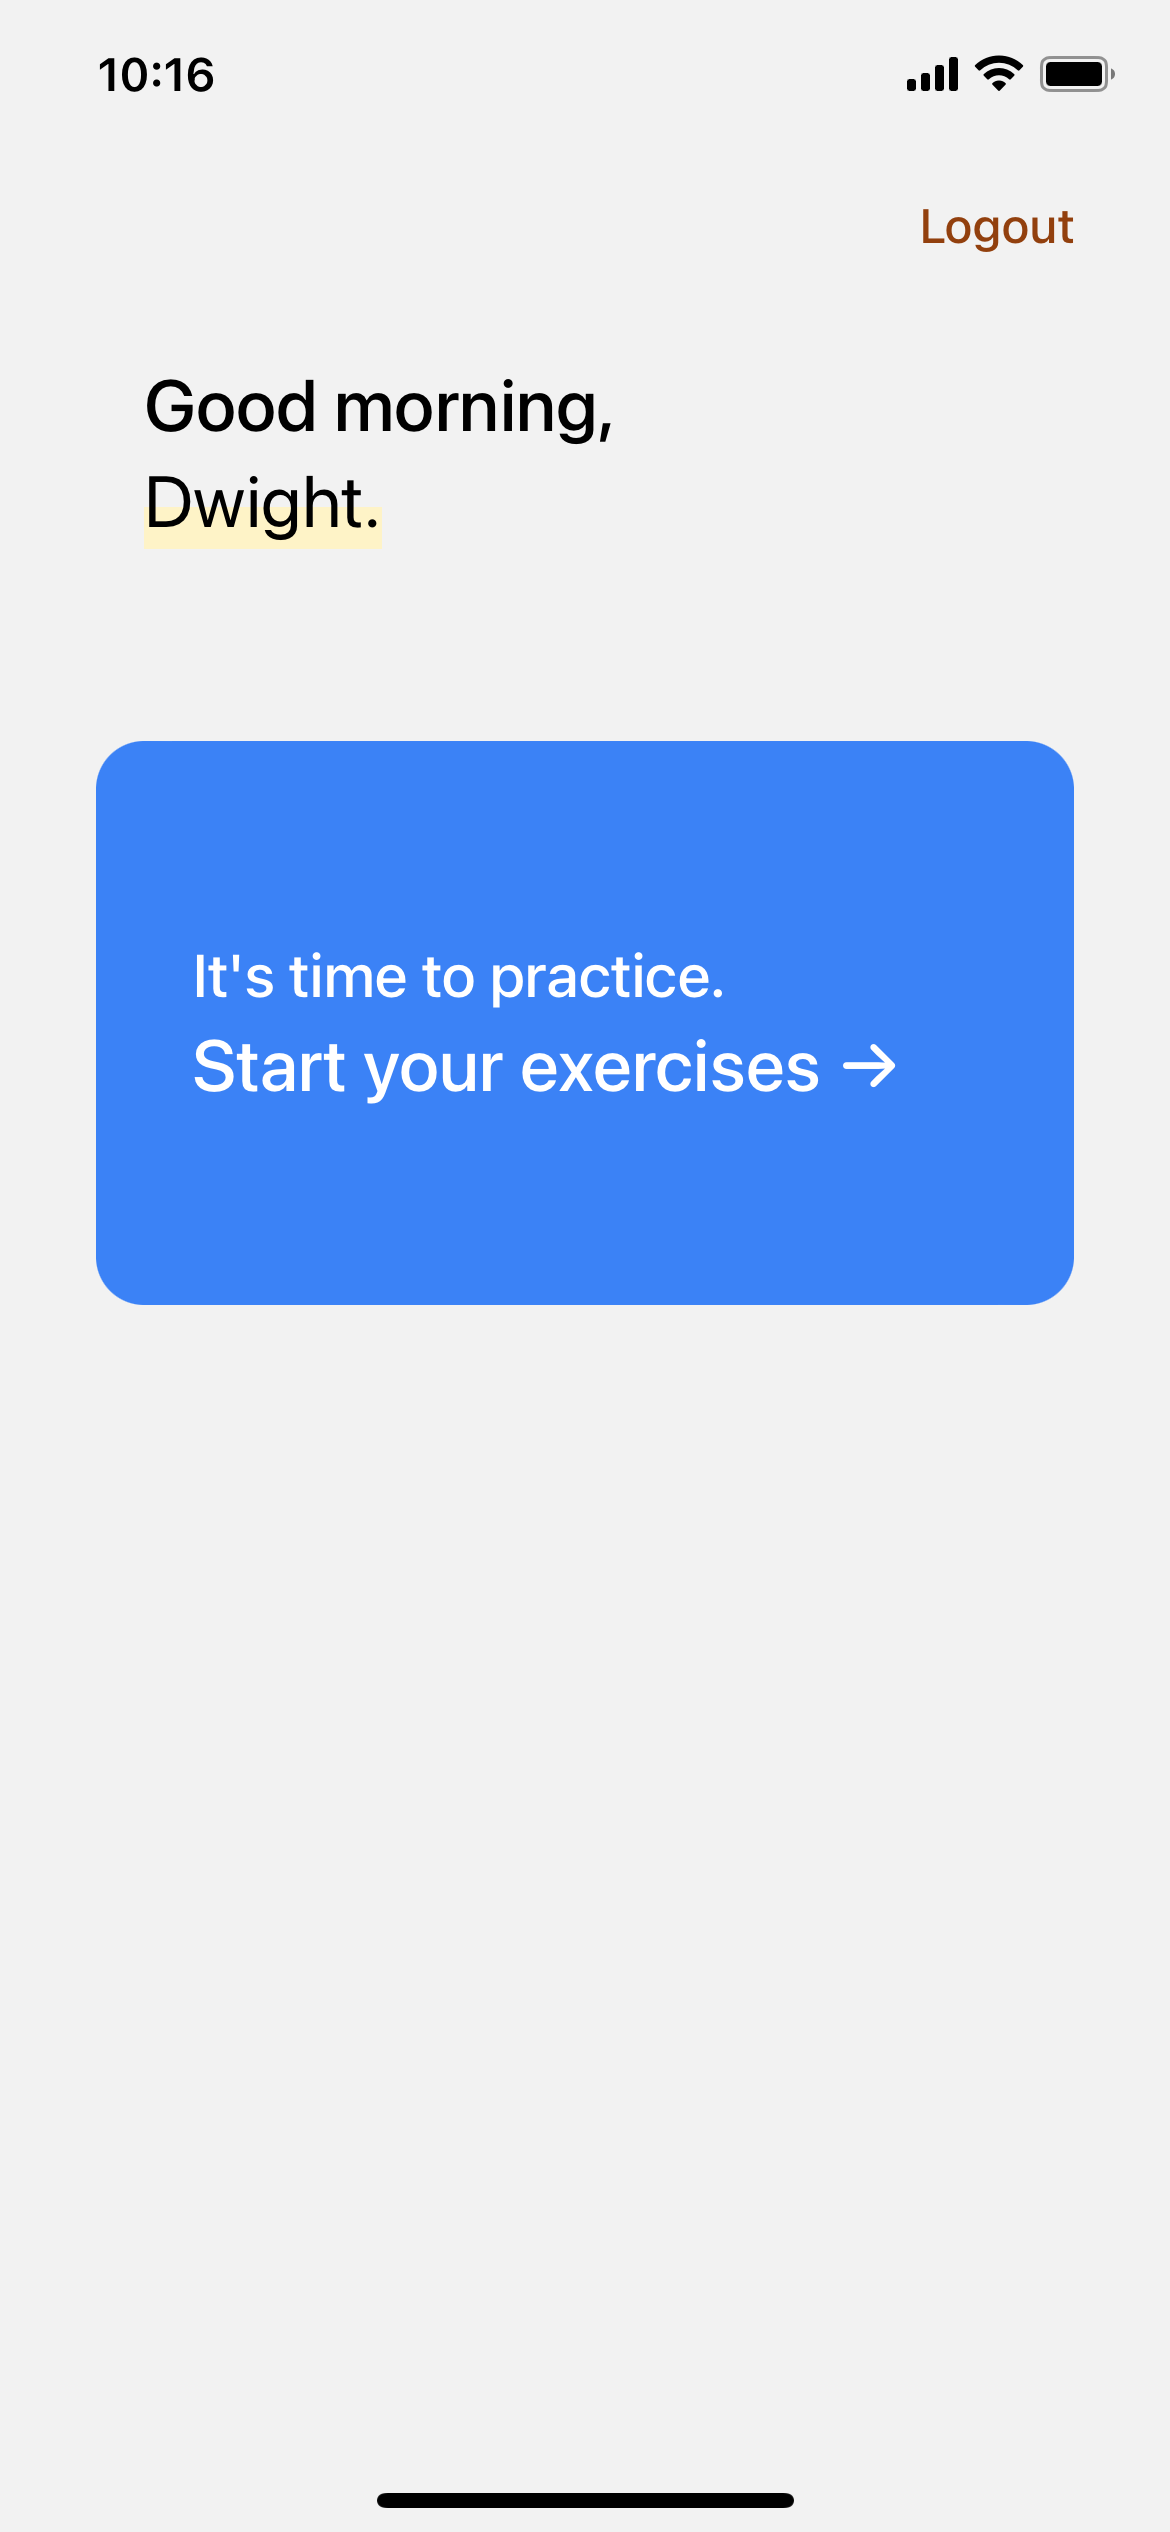 A screenshot of the Teleatherapy app home screen. There is a heading saying 'Good morning, Michael', a big blue button saying 'It's time to practice. Start your exercises.', and a logout button.